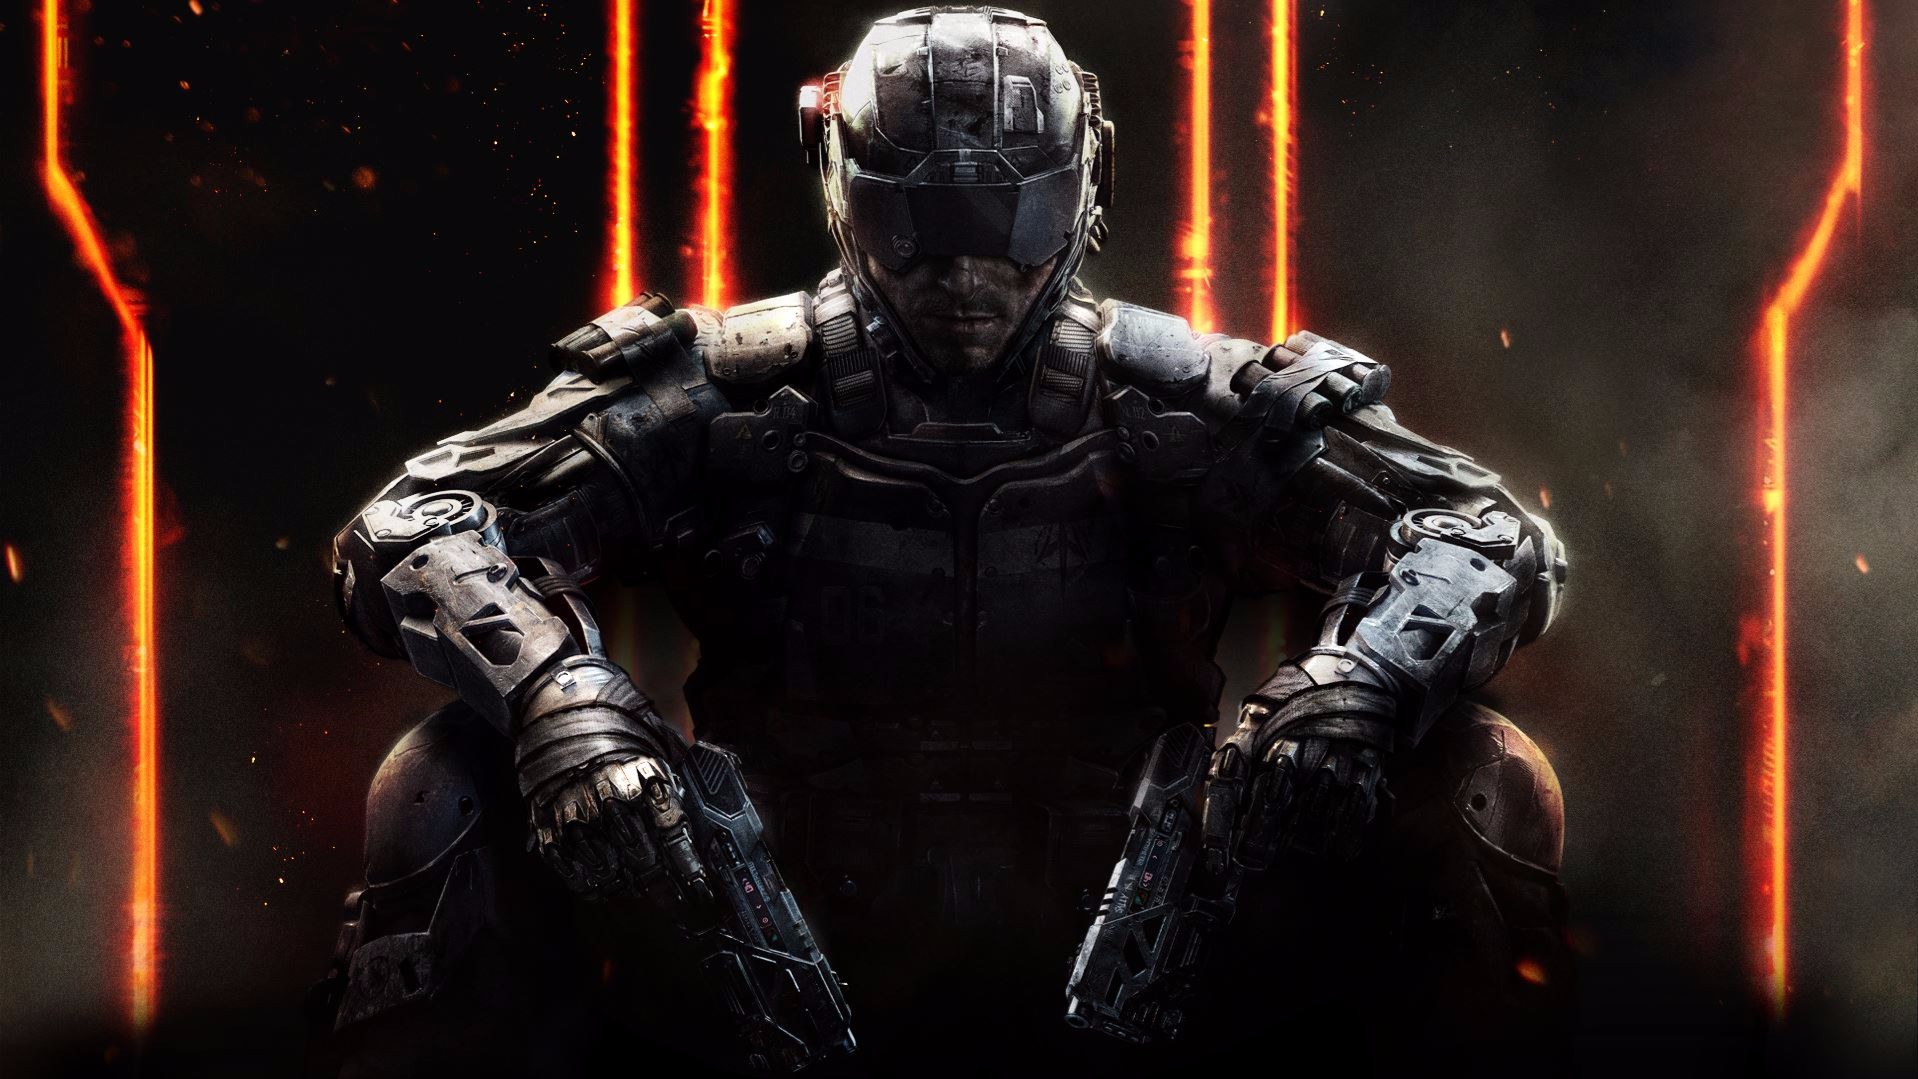 LOAD FILE: ‘BLACK OPS 3’ STRIKES A MATCH, SETS EXPECTATIONS ABLAZE, WALKS AWAY